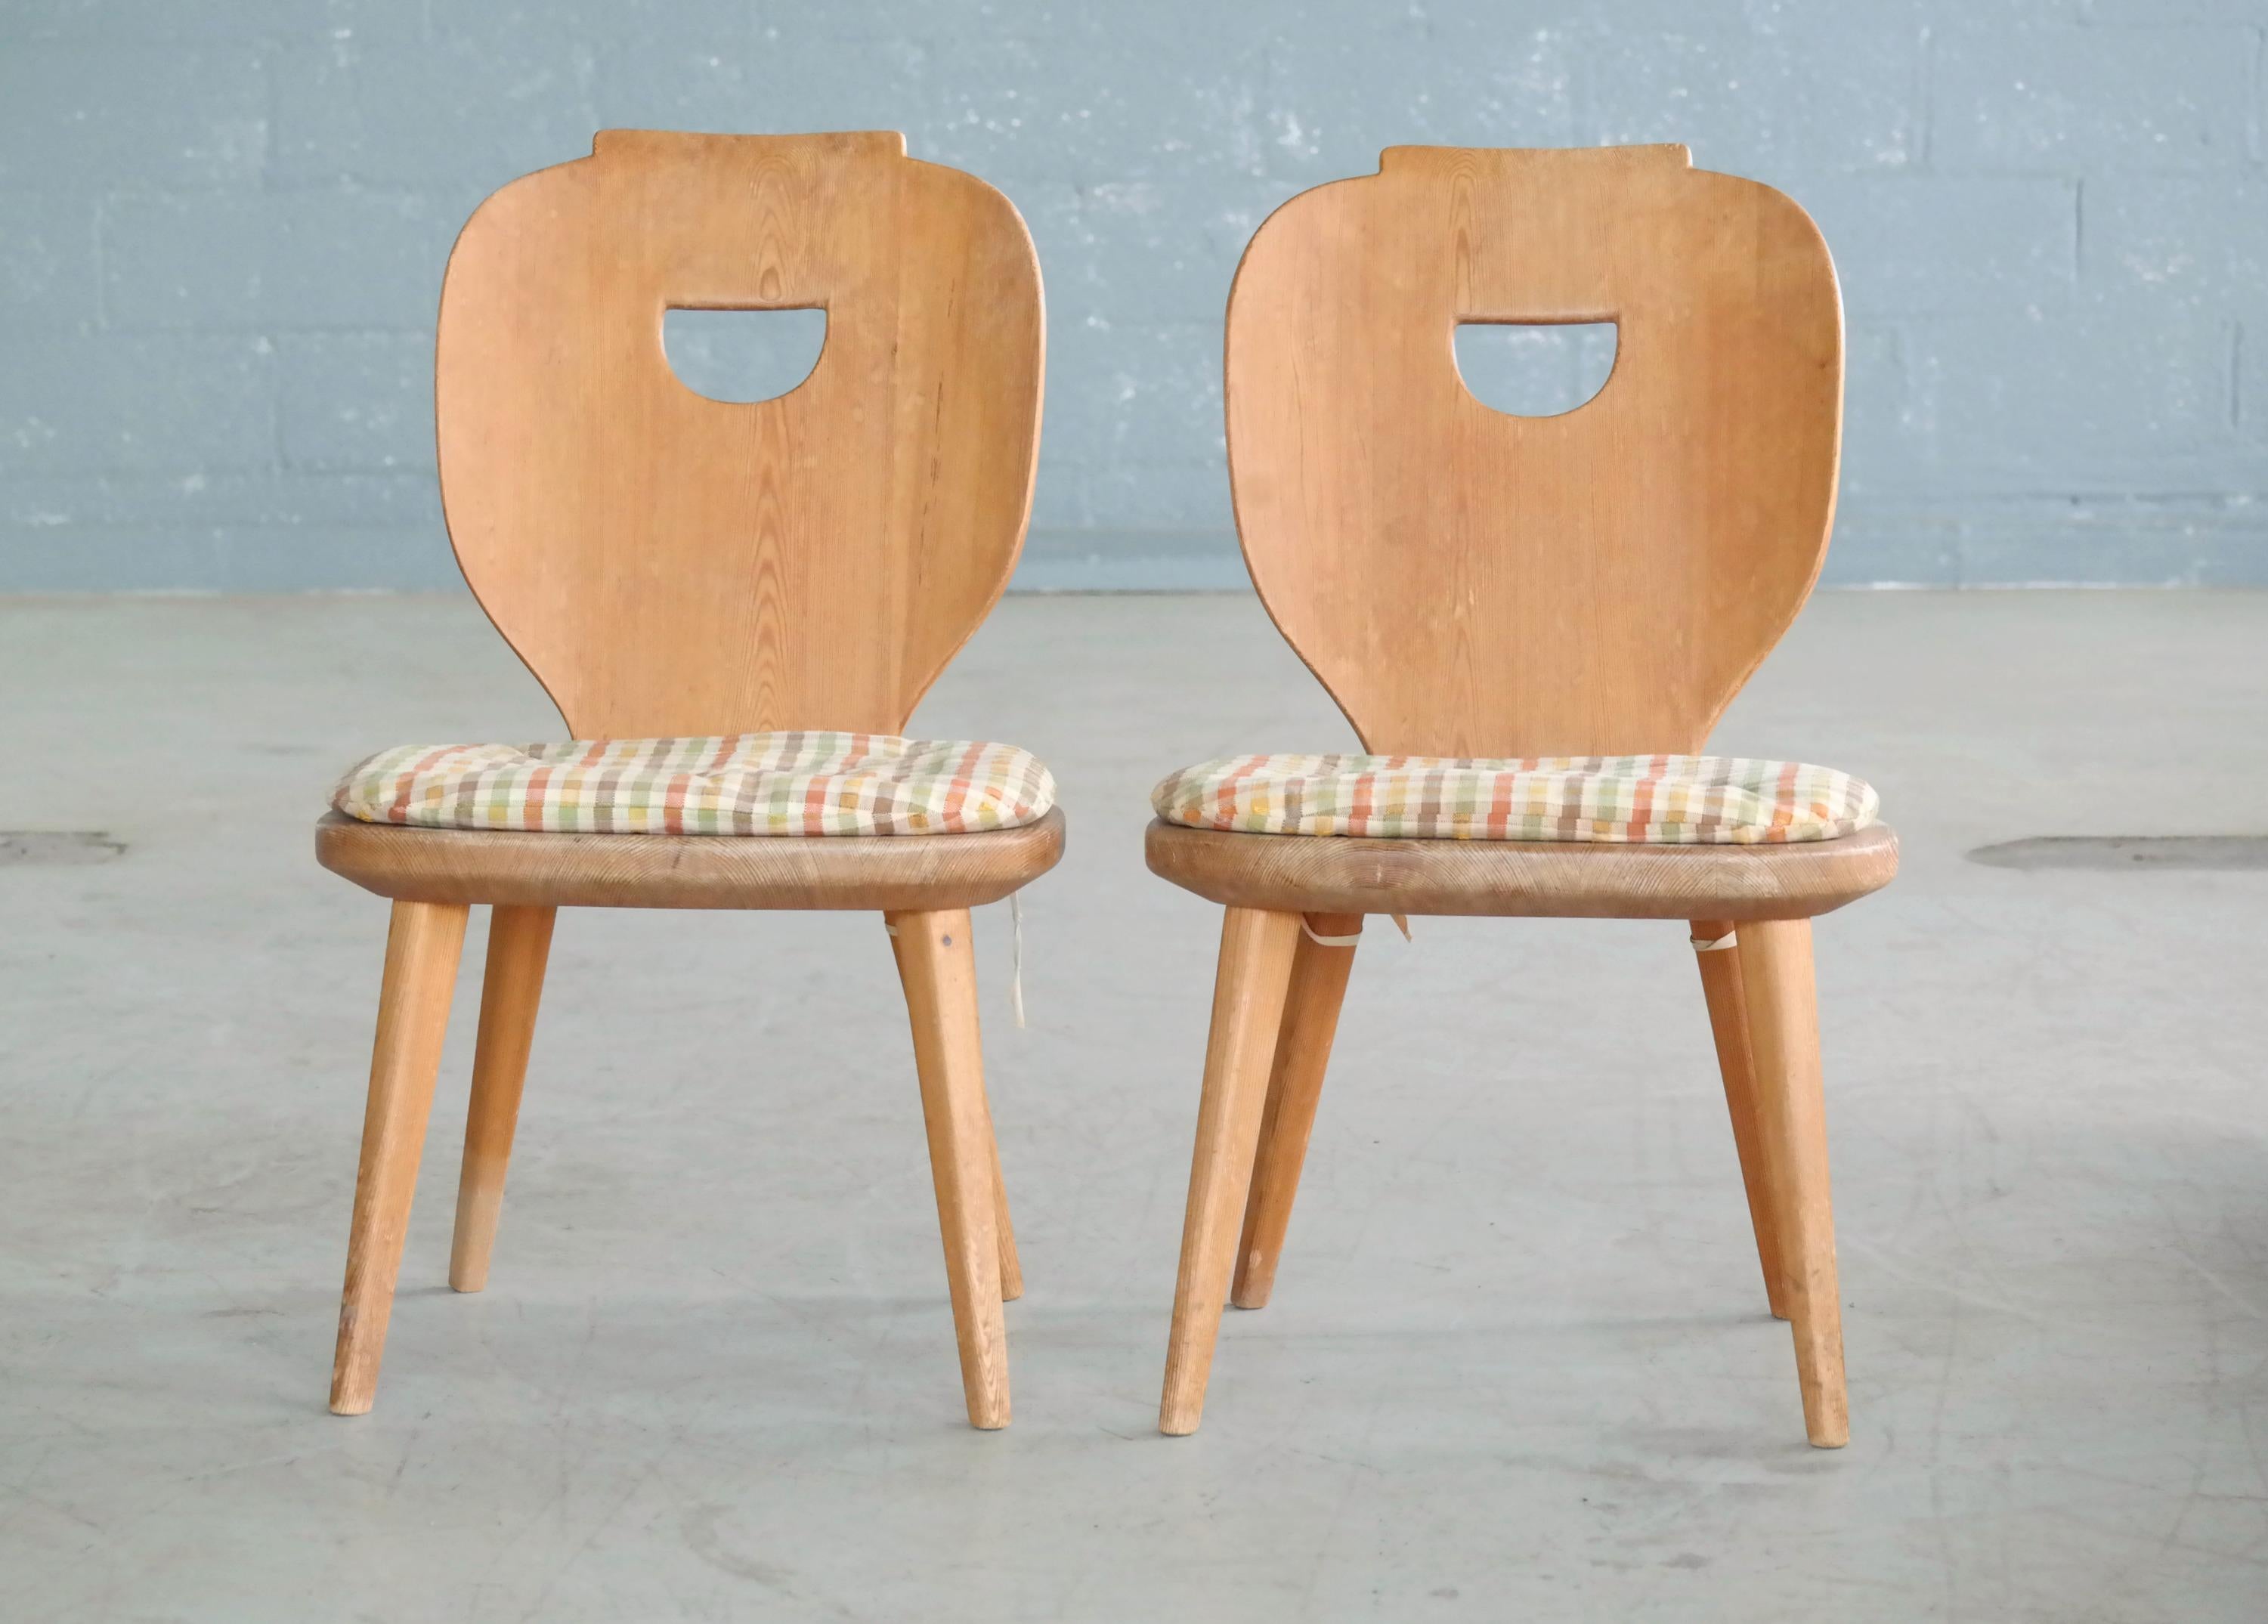 Pair of Carl Malmsten designed side chairs made in Sweden in the 1940s from solid pine. Perfect chairs for the country home or beach house. Has some resemblance to Axel Einar Hjort's famous Lovo chairs. Some signs of natural wear and great natural